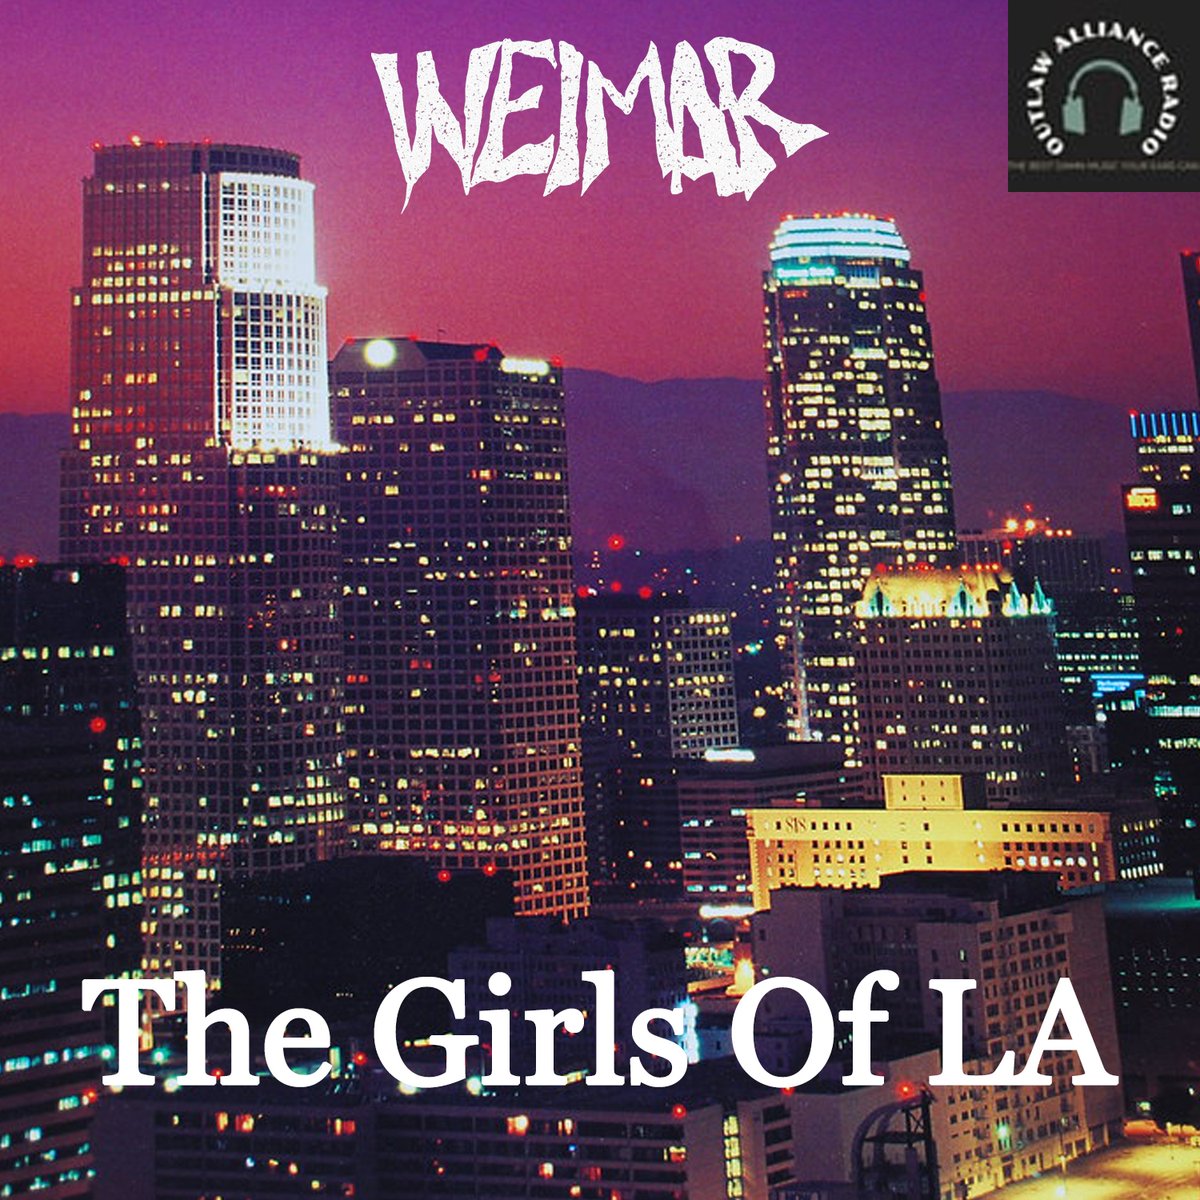 Special thanks to @pmadtheband for featuring 'The Girls Of LA' on the Indie Gems show on @OutlawAlliance1 Radio! Stream the show here: mixcloud.com/outlawalliance… @ShamelessPR_